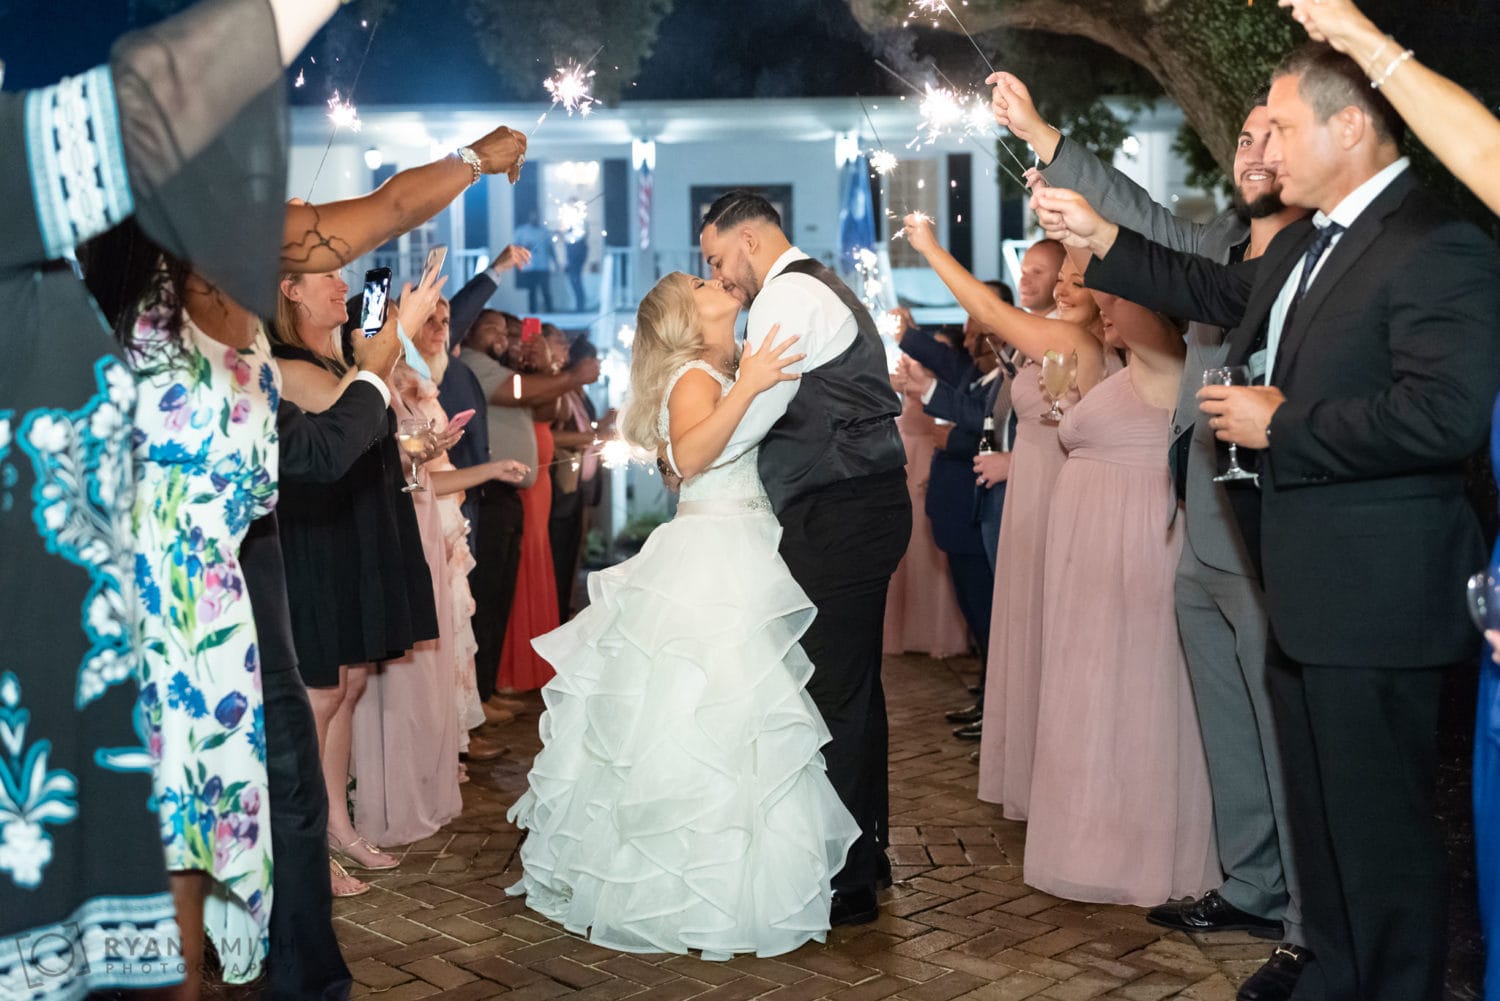 Kiss under the sparklers - Litchfield Country Club